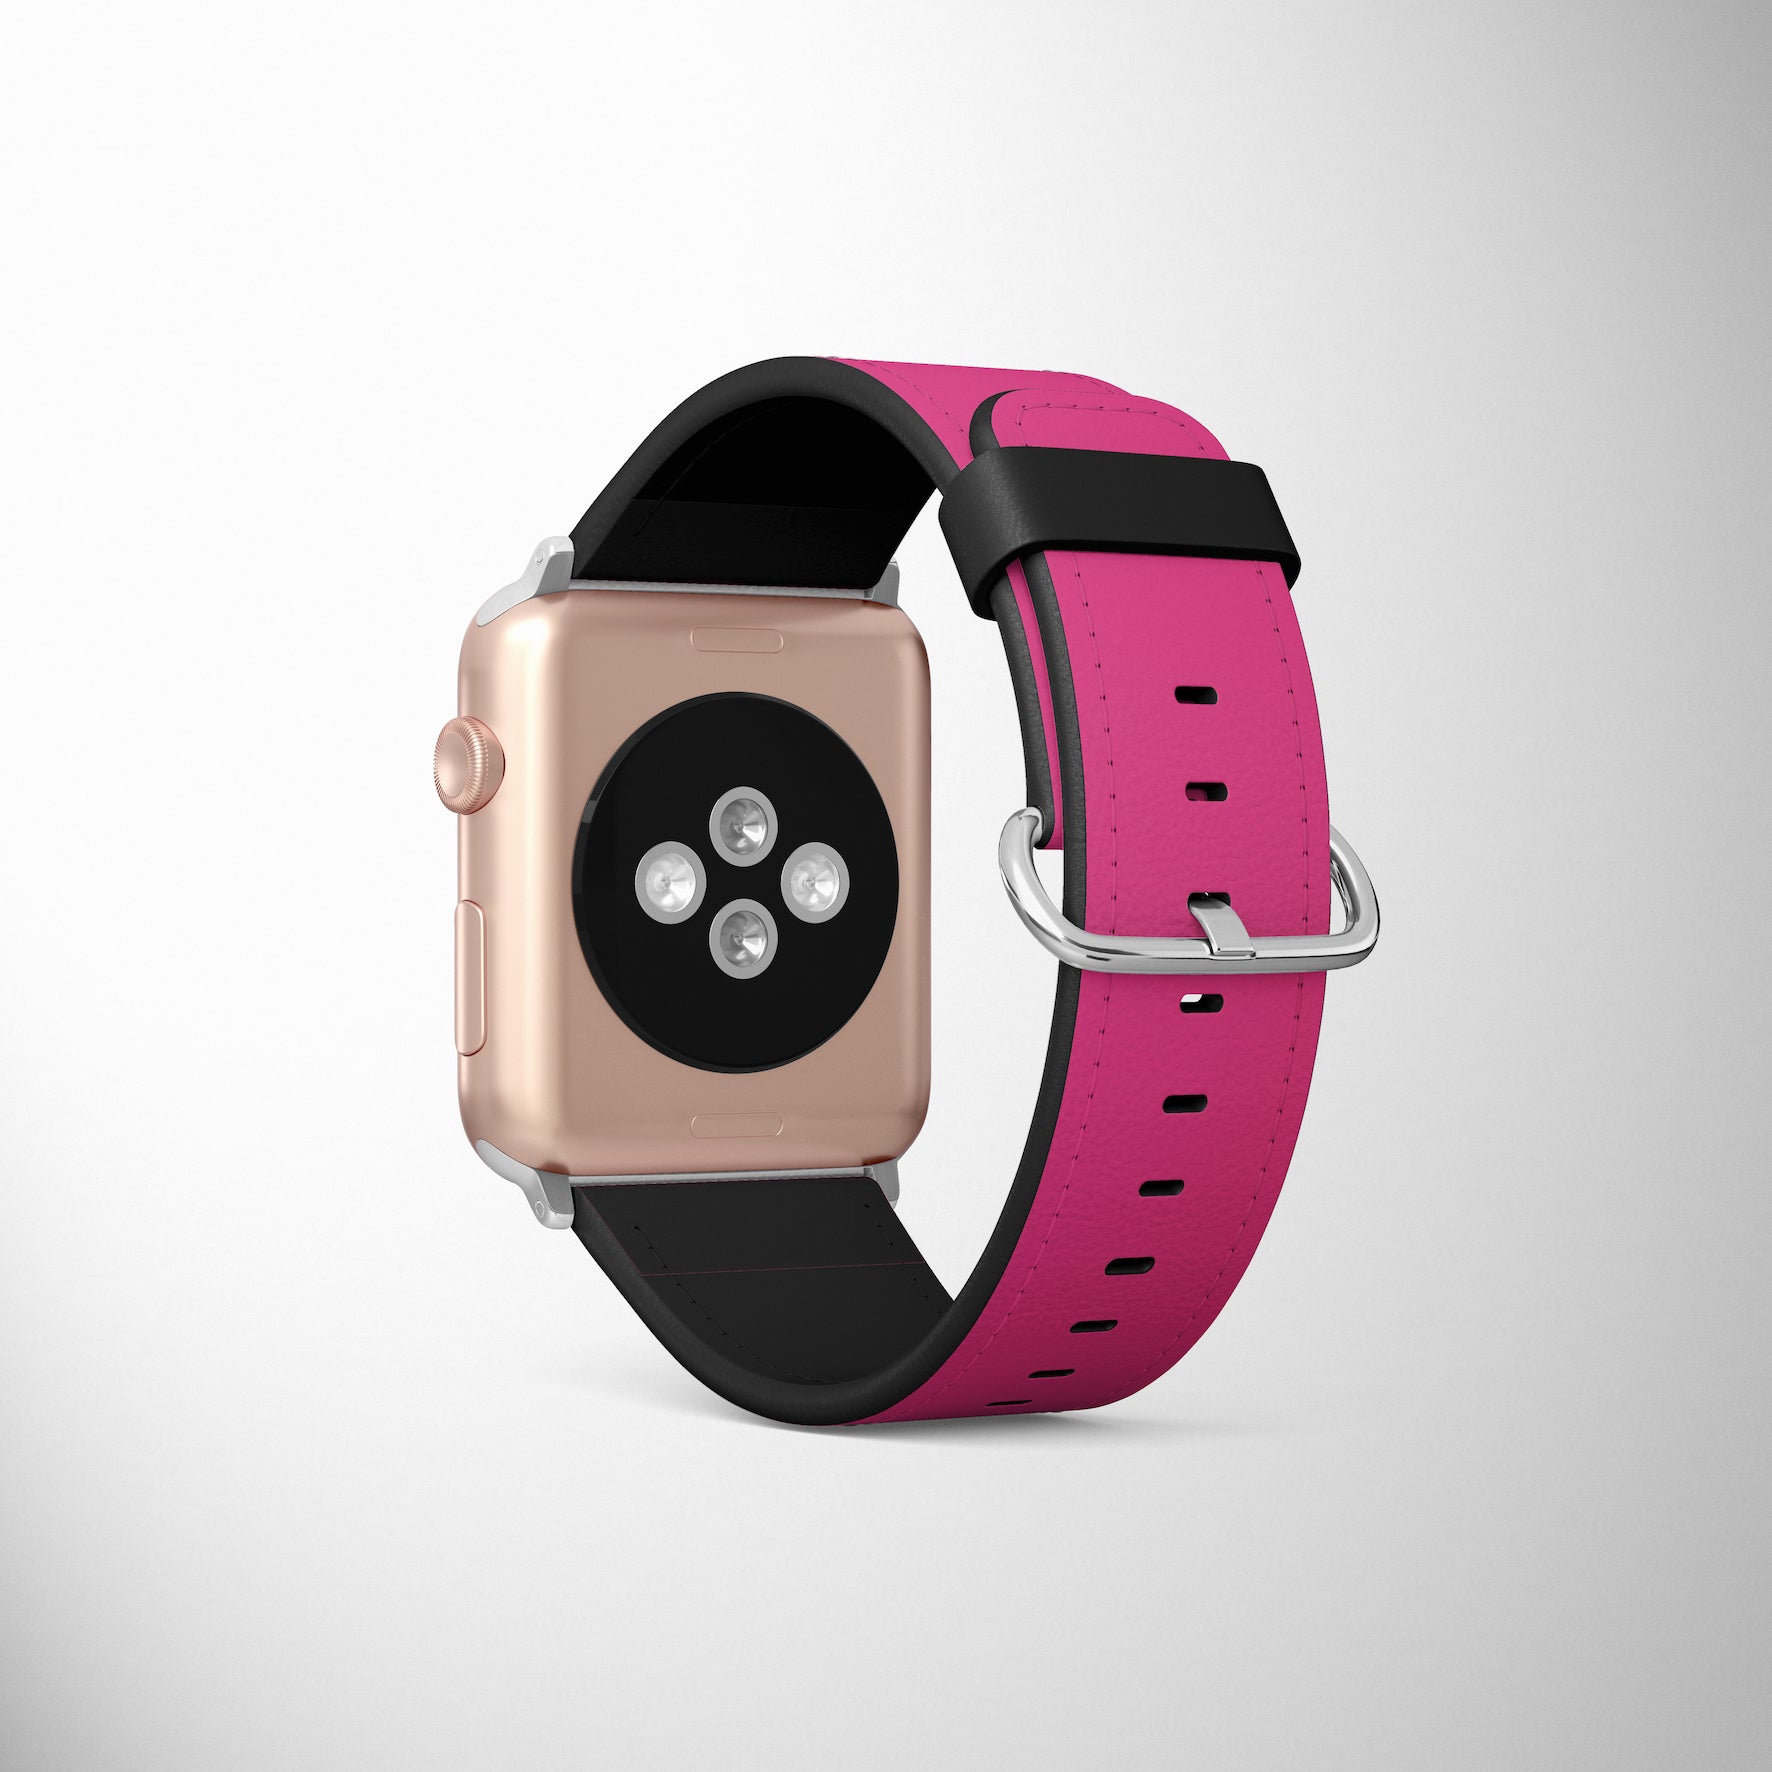 Pink Love Heart Faux Leather Apple Watch Band for Apple Watch 1,2,3,4,5,6,SE - www.scottsy.com